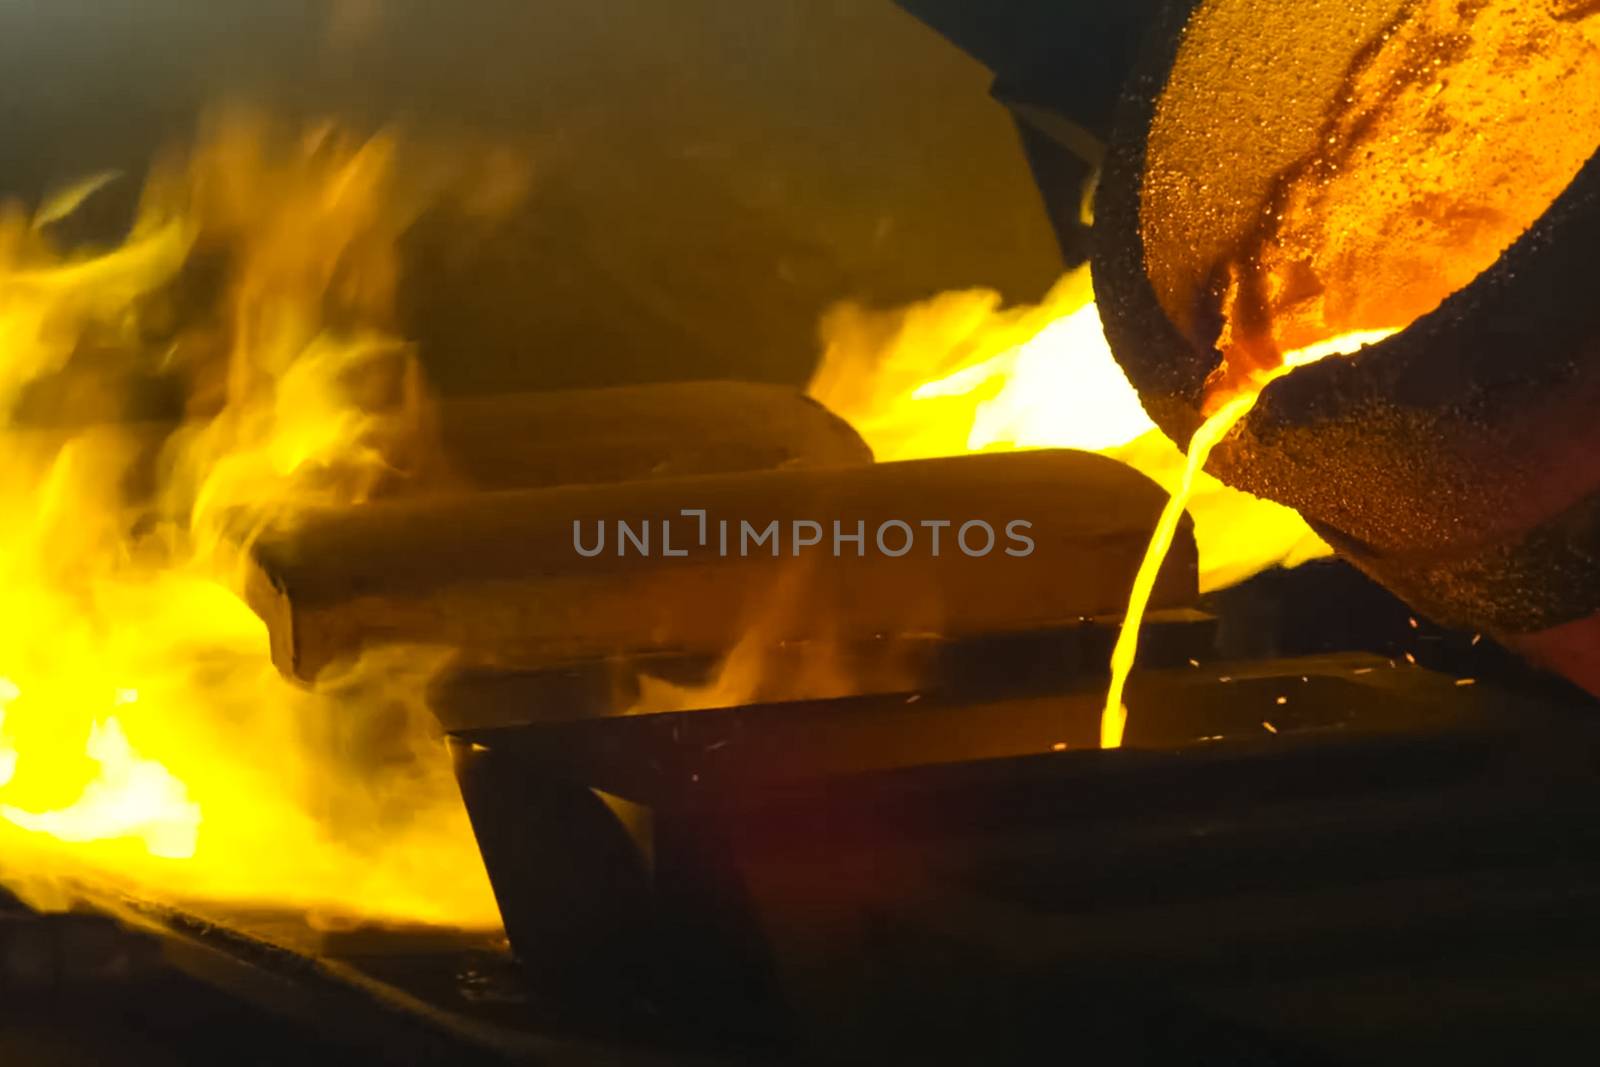 large bowl of molten metal at a steel mill. Steel production. by DePo